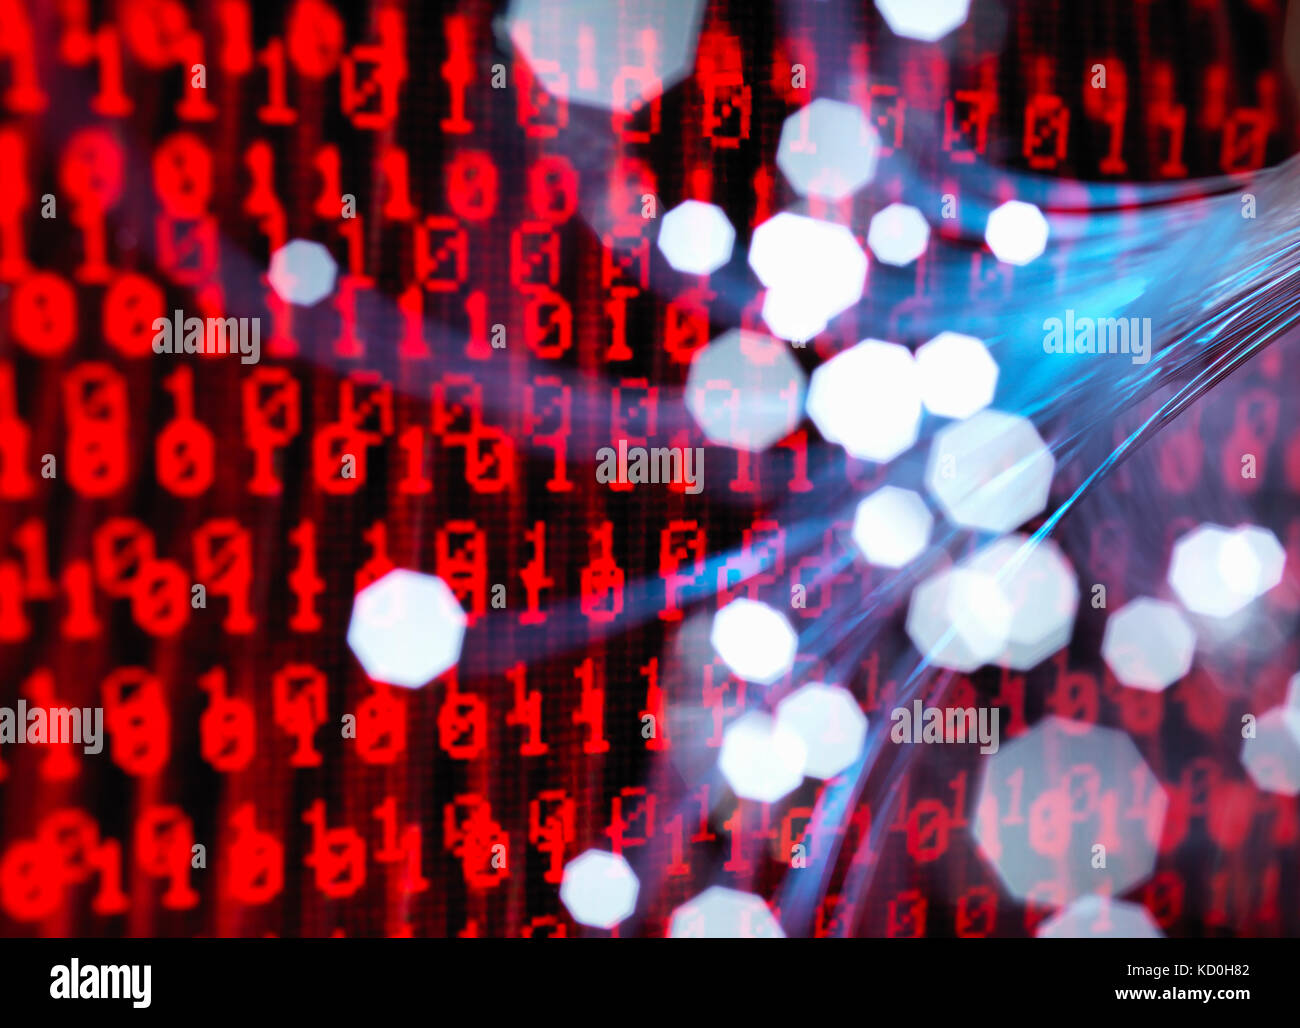 Fibre optics carrying data attacking a laptop computer which has a virus Stock Photo